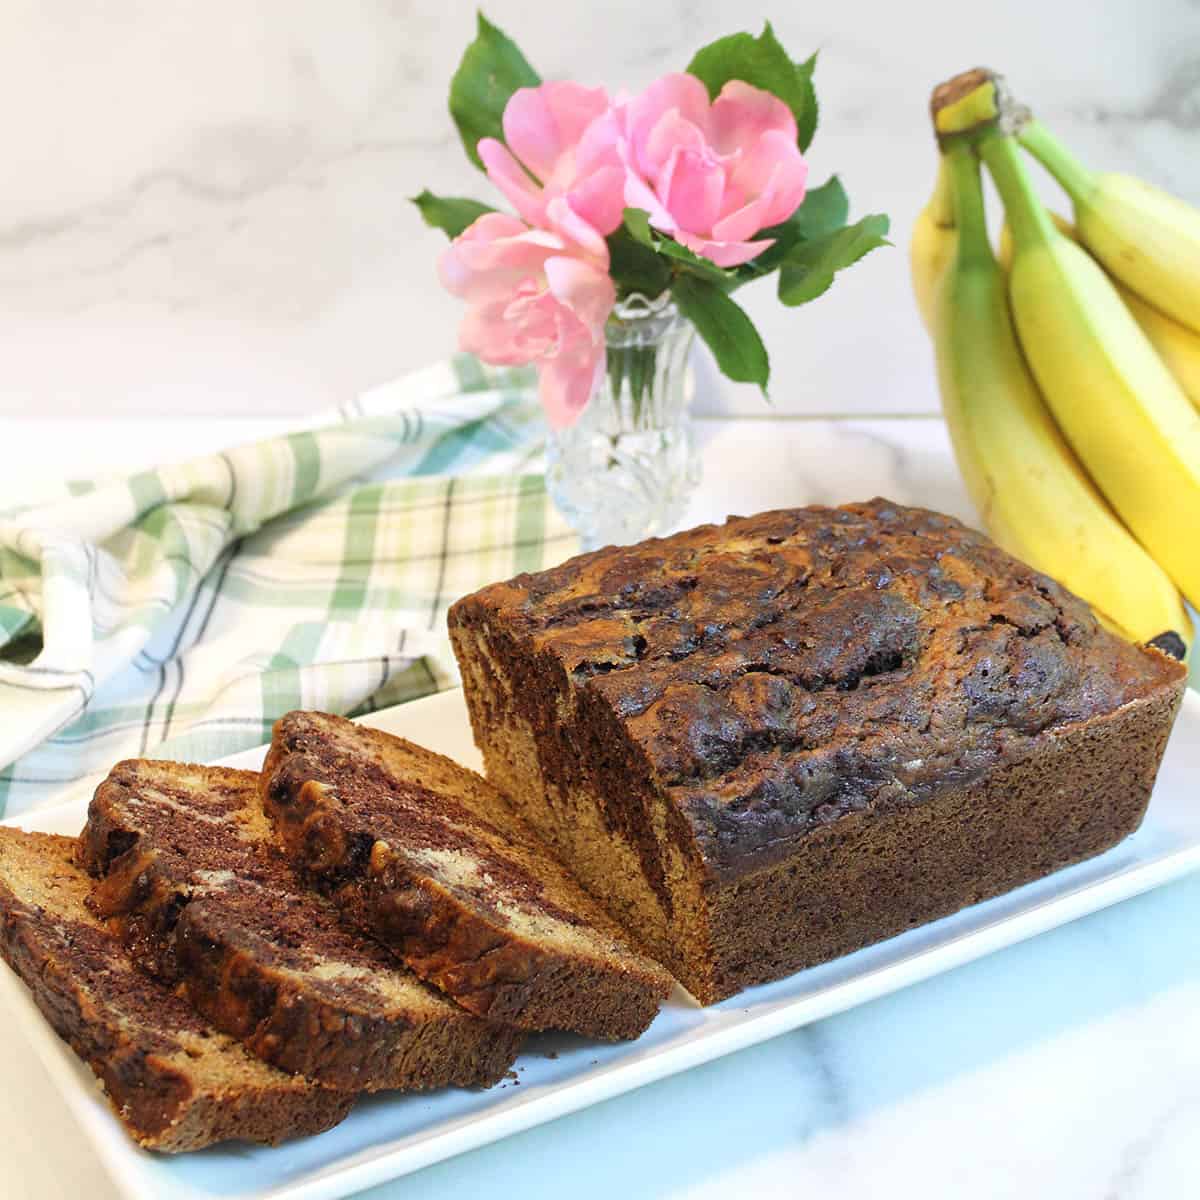 Banana bread on white platter with flowers and bunch of bananas.